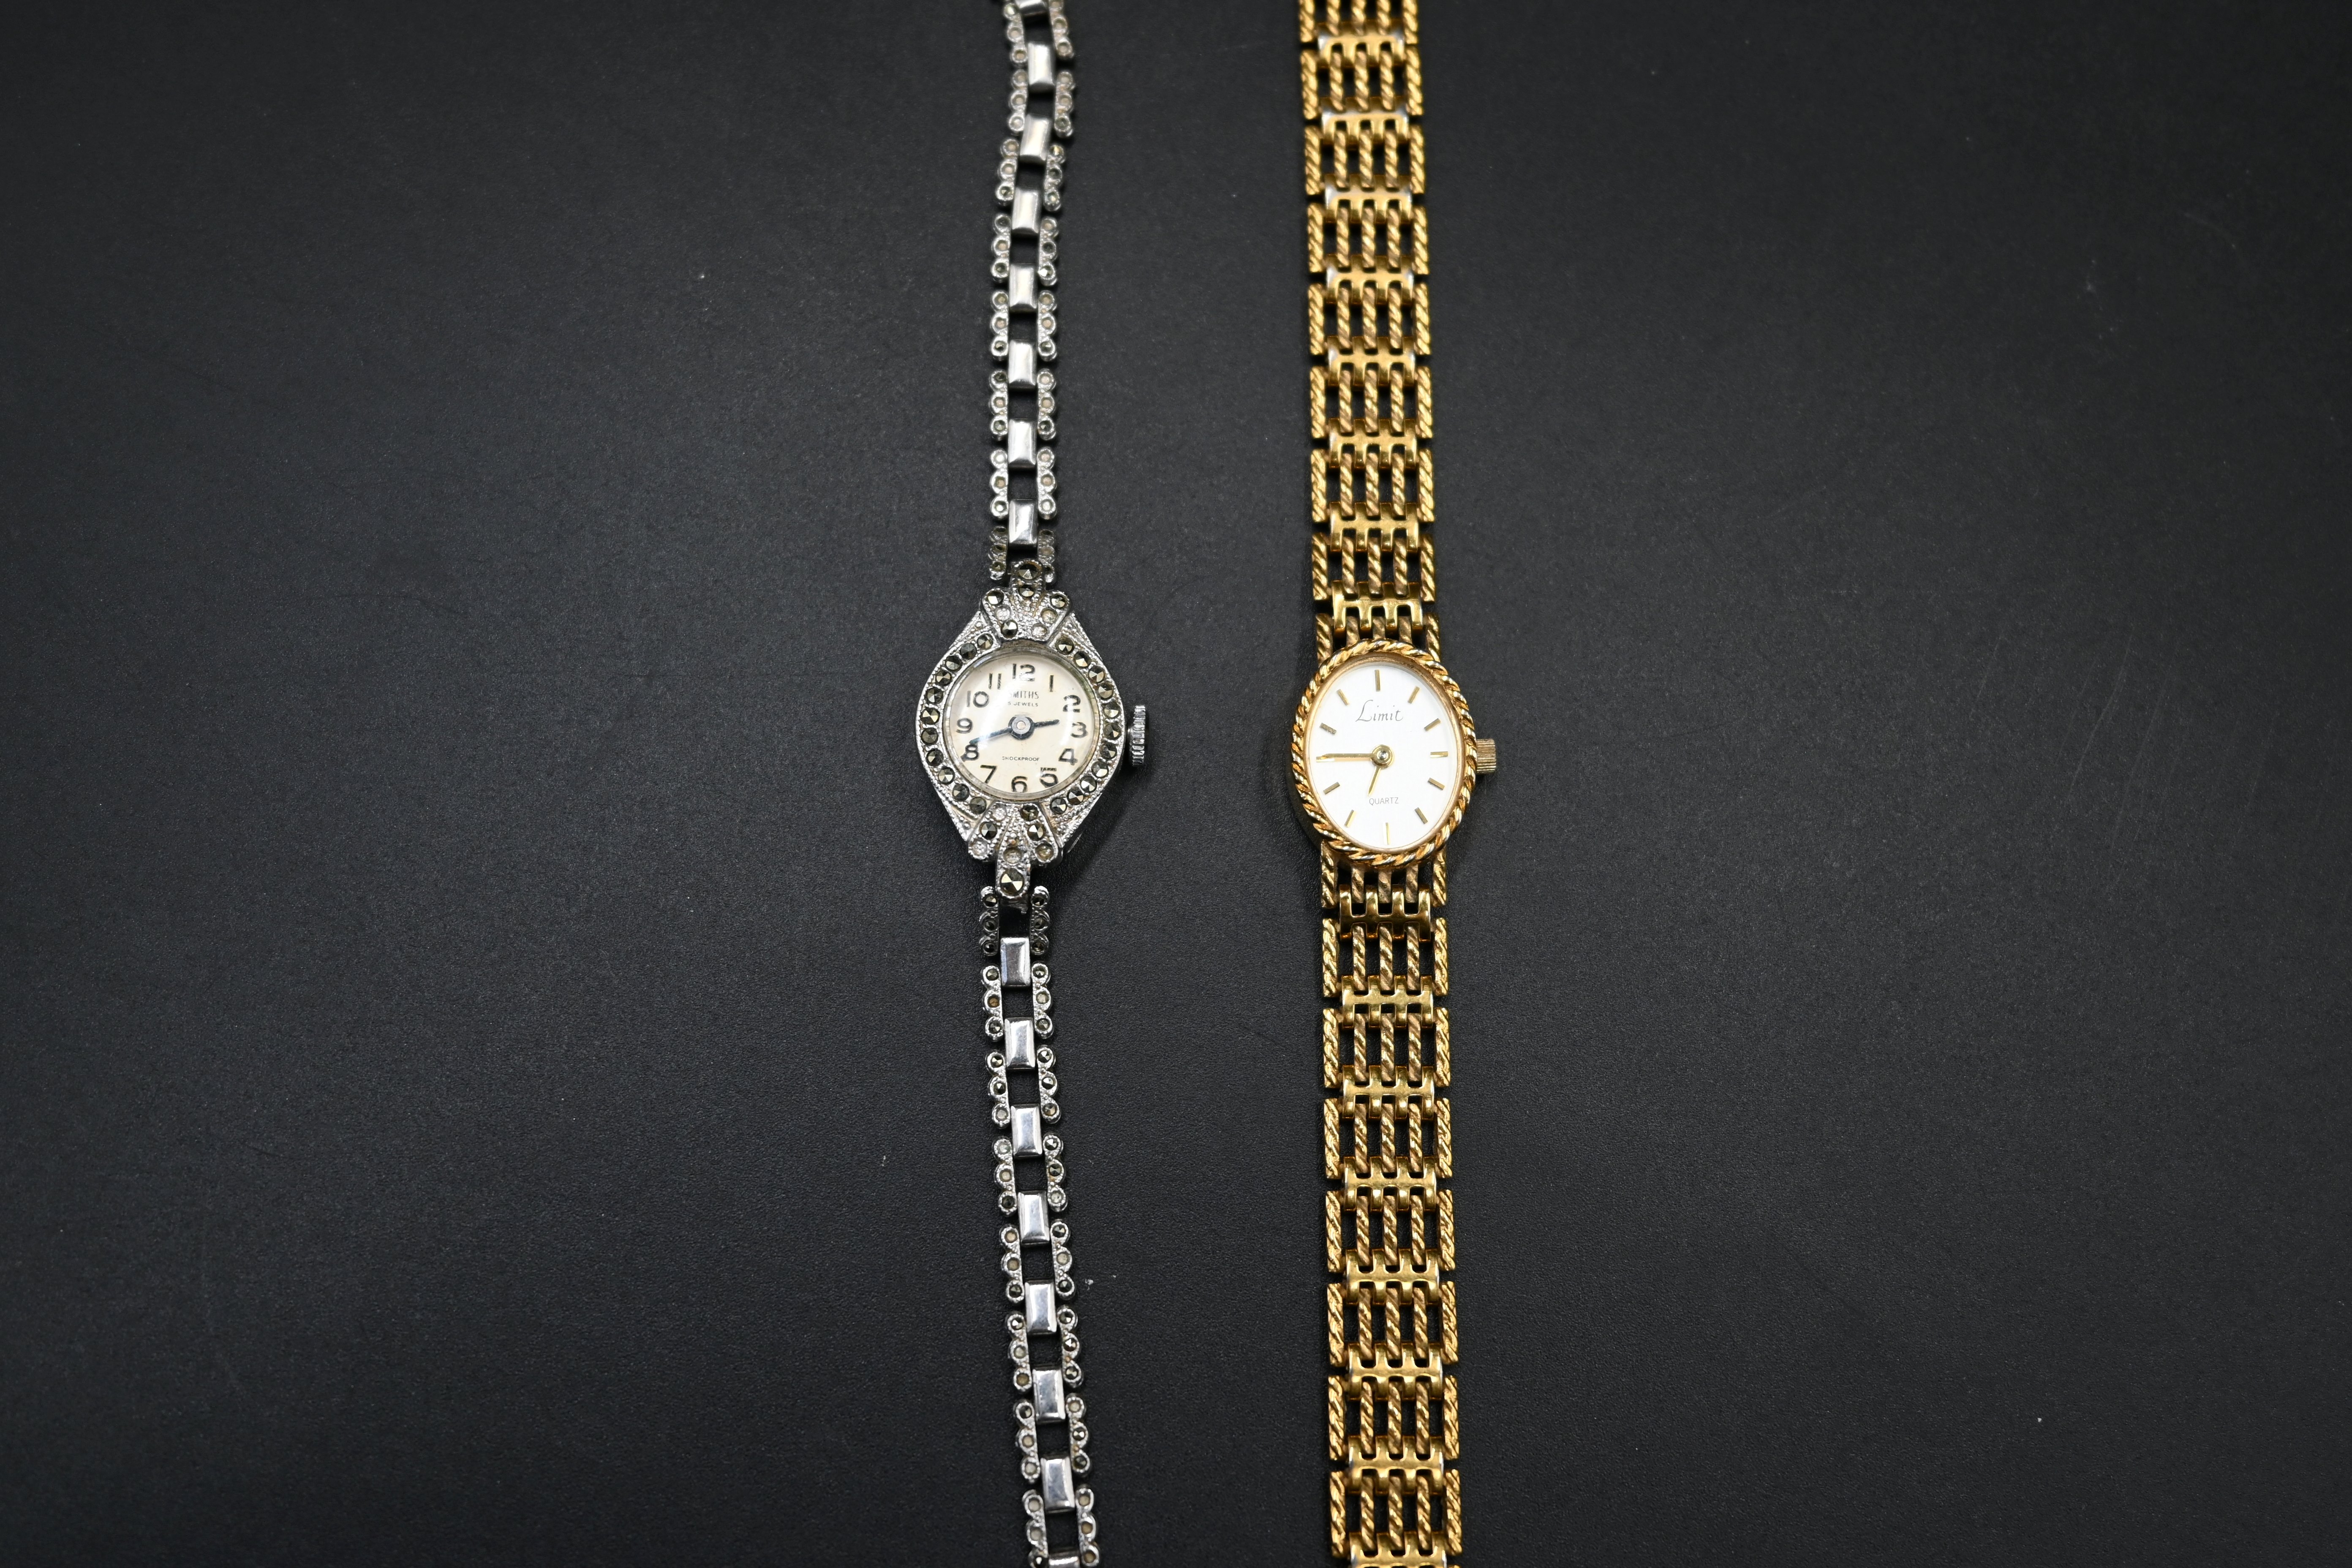 Smiths 5 jewels ladies marcasite art deco styly cocktail watch together with a Limit quartz watch